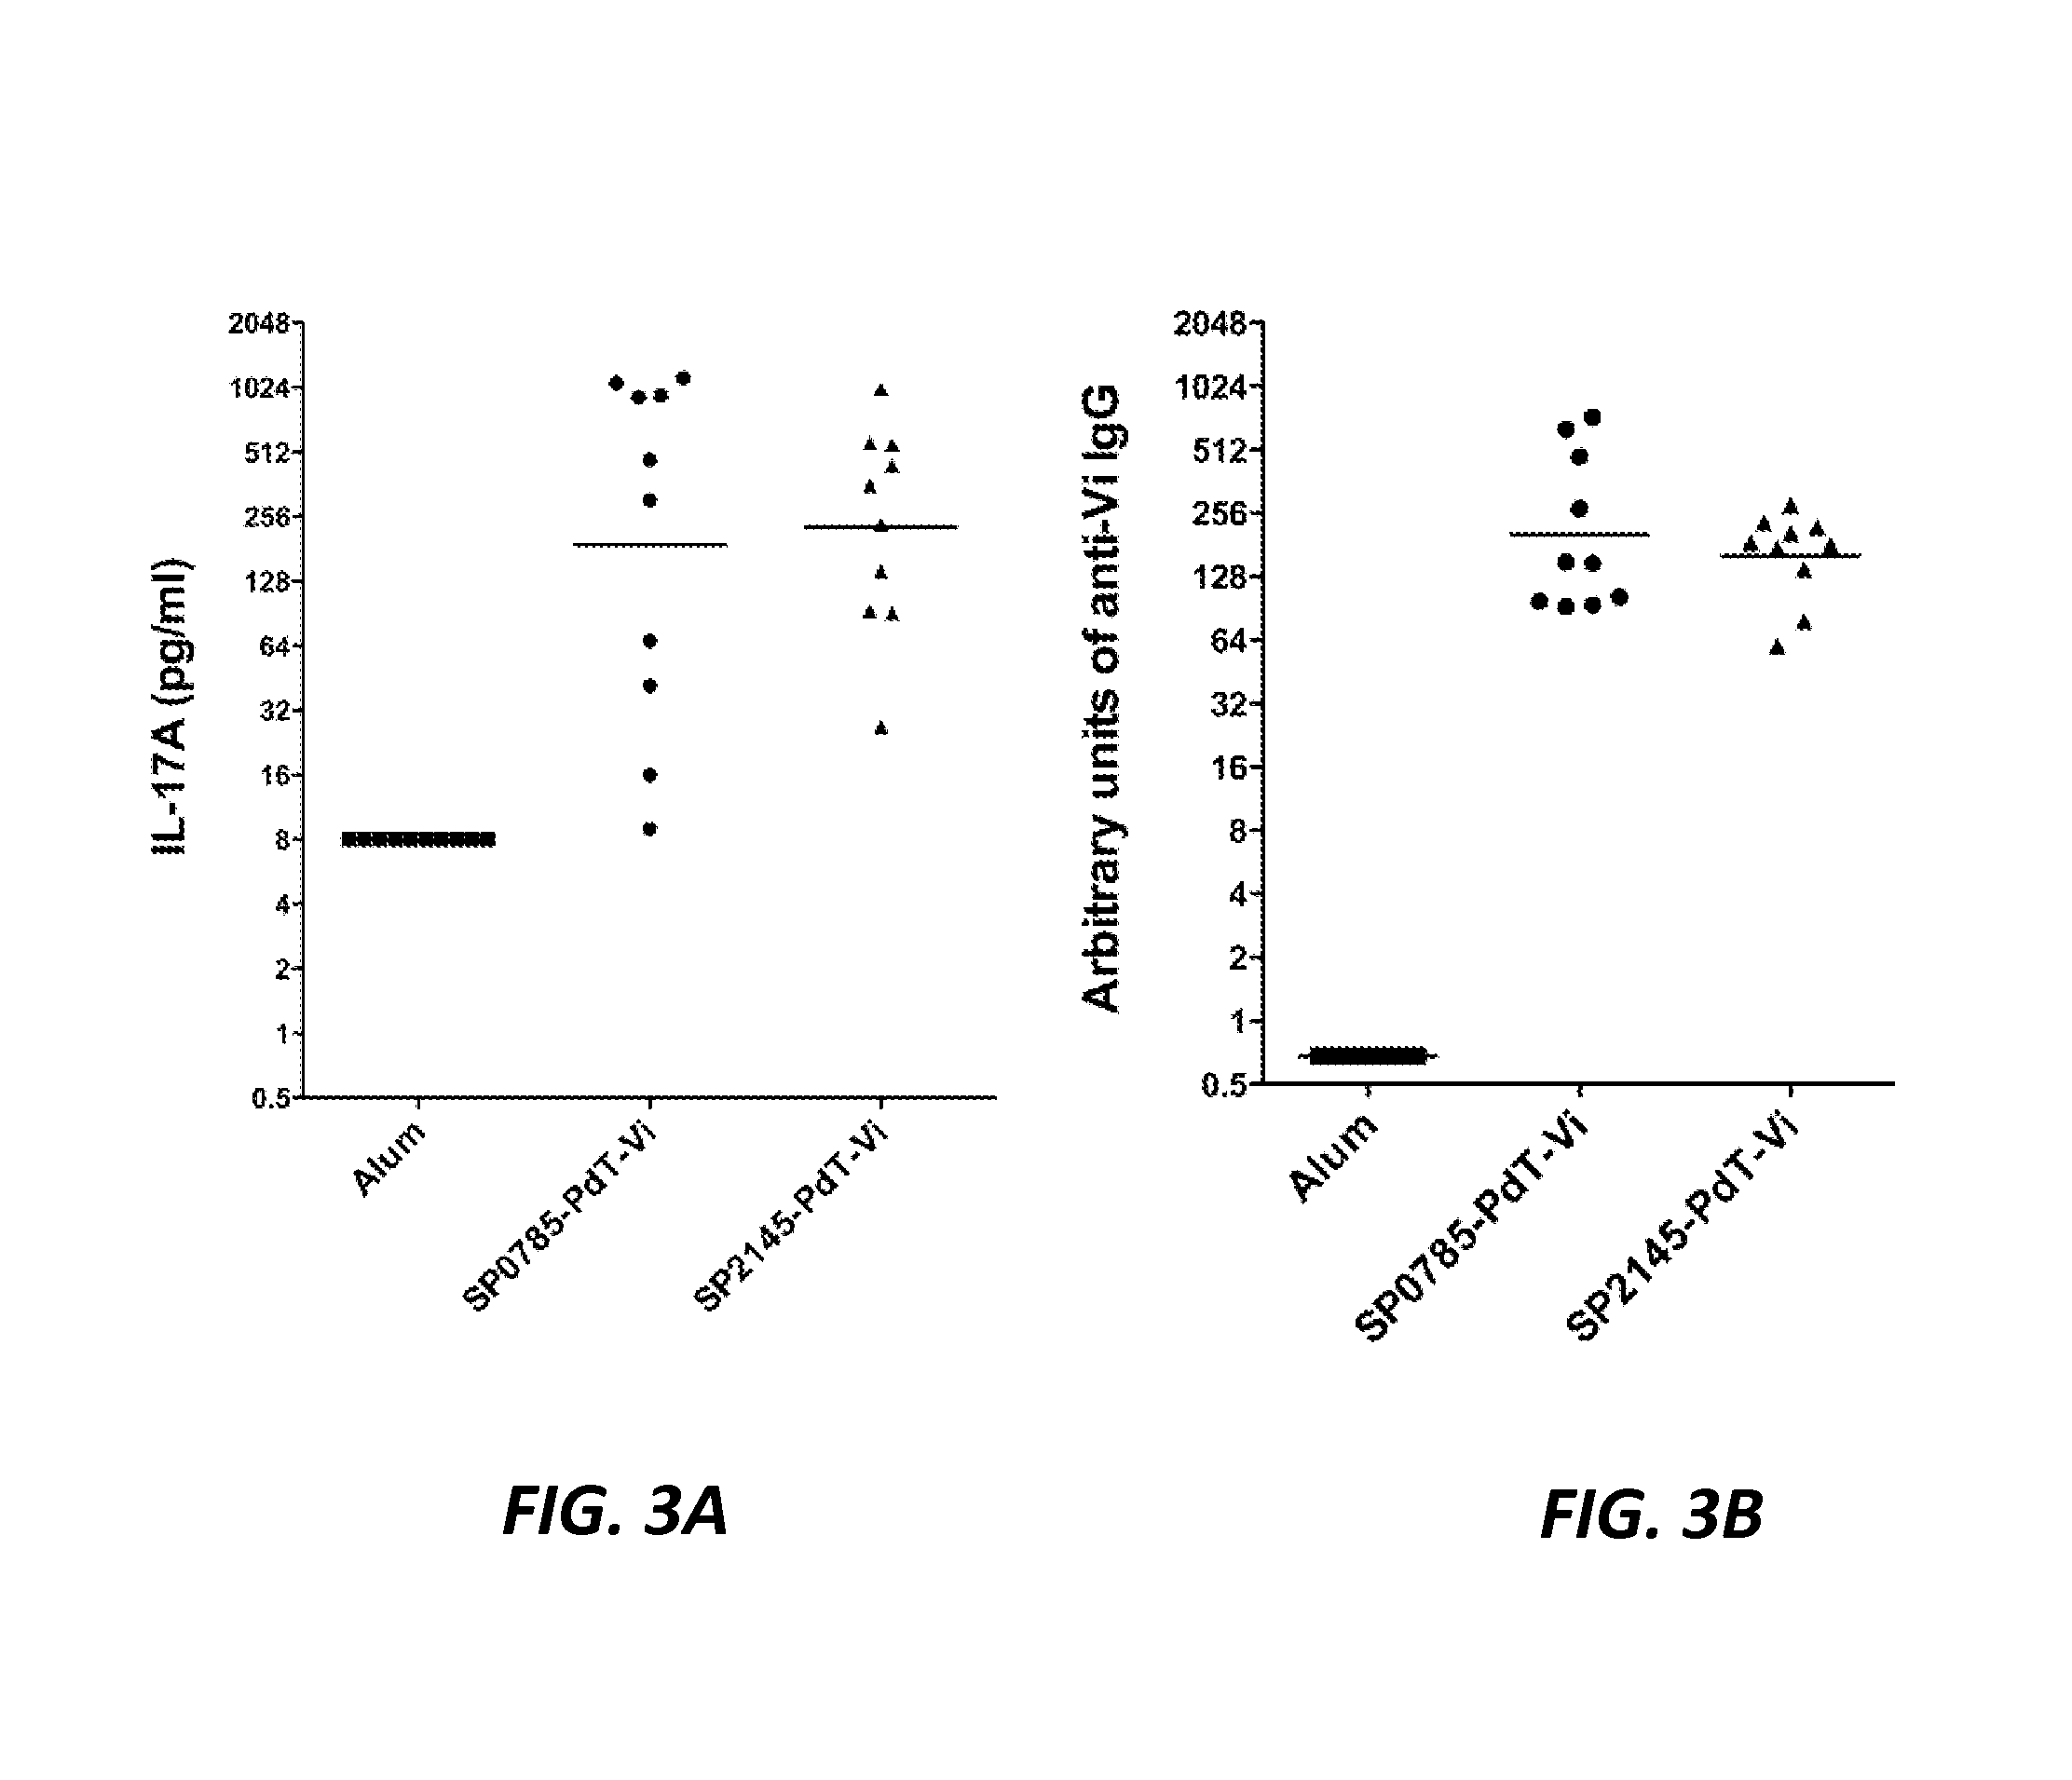 Protein antigens that provide protection against pneumococcal colonization and/or disease